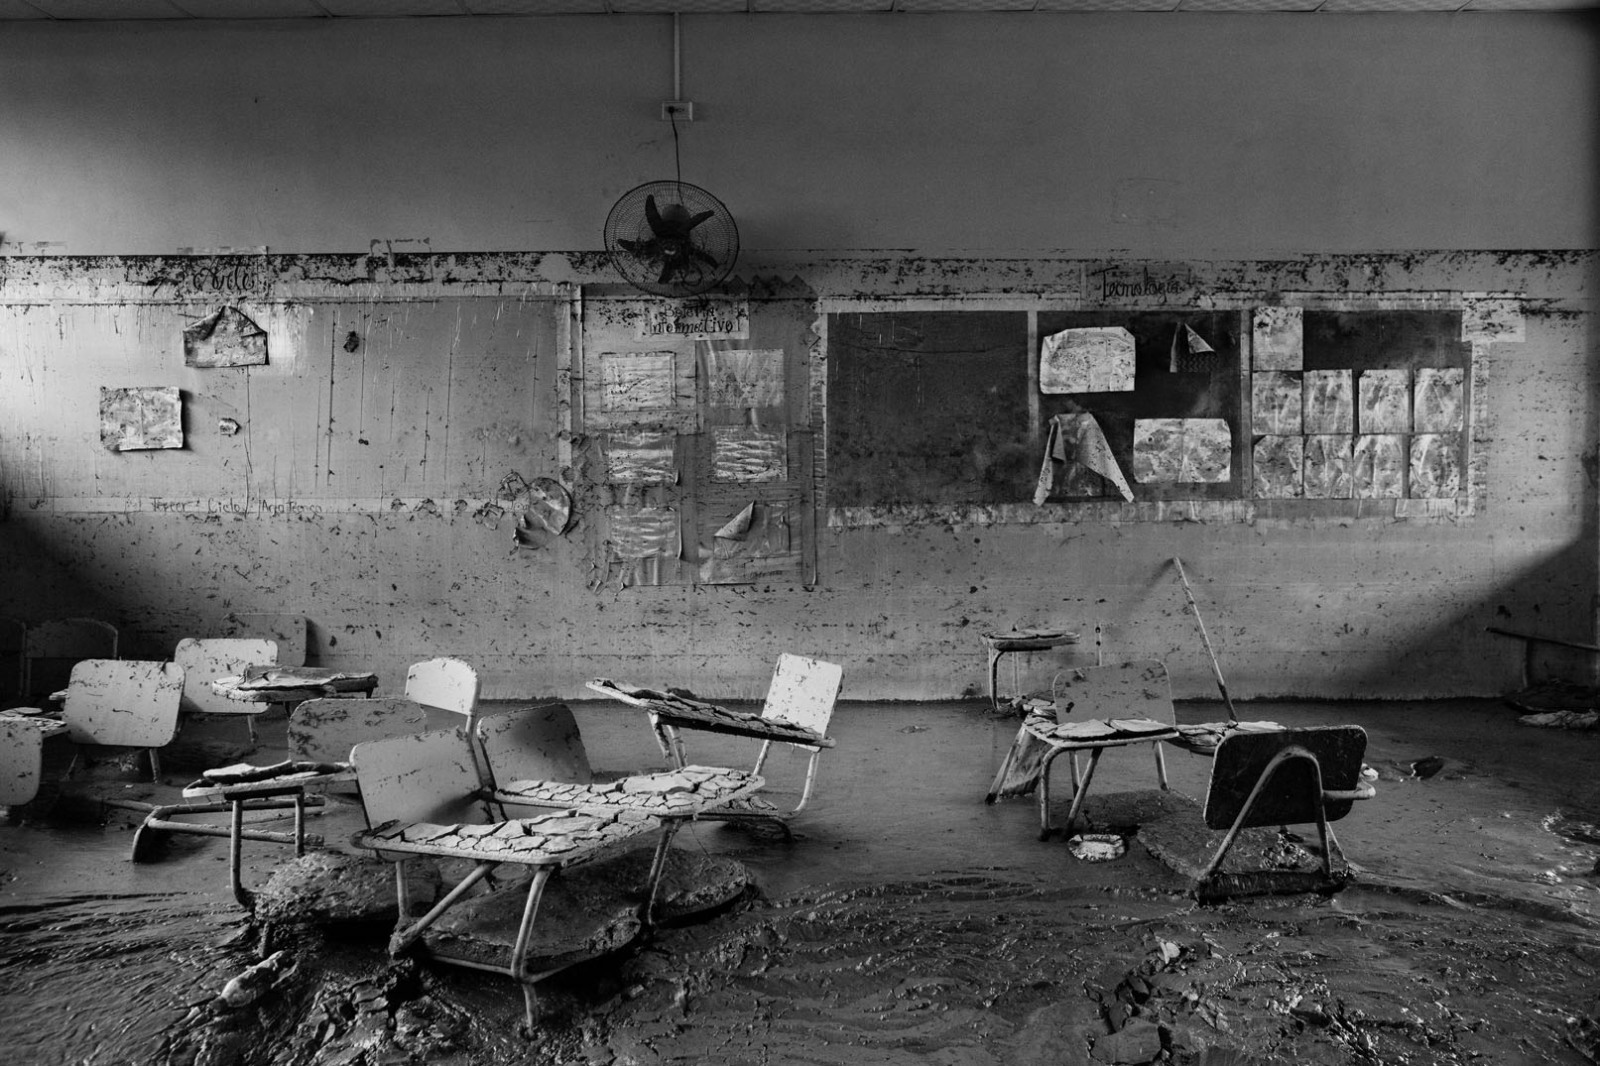 View inside a mud-covered classroom in Chamelecon, in San Pedro Sula, Honduras, on January 11, 2021. 
When hurricanes Eta and Iota hit Central America in November 2020, the Chamelecon neighborhood was one of the most affected areas of San Pedro Sula.
According to UNICEF, 1.772.033 children in Honduras were affected by the disaster. Access to regular education, already complicated by the pandemic, was impossible with destroyed schools. 
The entry to this conflictive area, controlled by local gangs, was granted by the support of a community leader, who, like many other people, migrated to the Northern Mexican border in mid-January. The photographer met him again in Ciudad Juarez, in Mexico, months after, when he commented he was living with his girlfriend and a step-daughter. He had found a source of income but refused to specify his occupation. 
His dead body, with signs of tortures and a coup de grace, was found in a street of Ciudad Juarez on September 15, covered by a blanket, a symbol used by the Mexican cartels to announce executions.